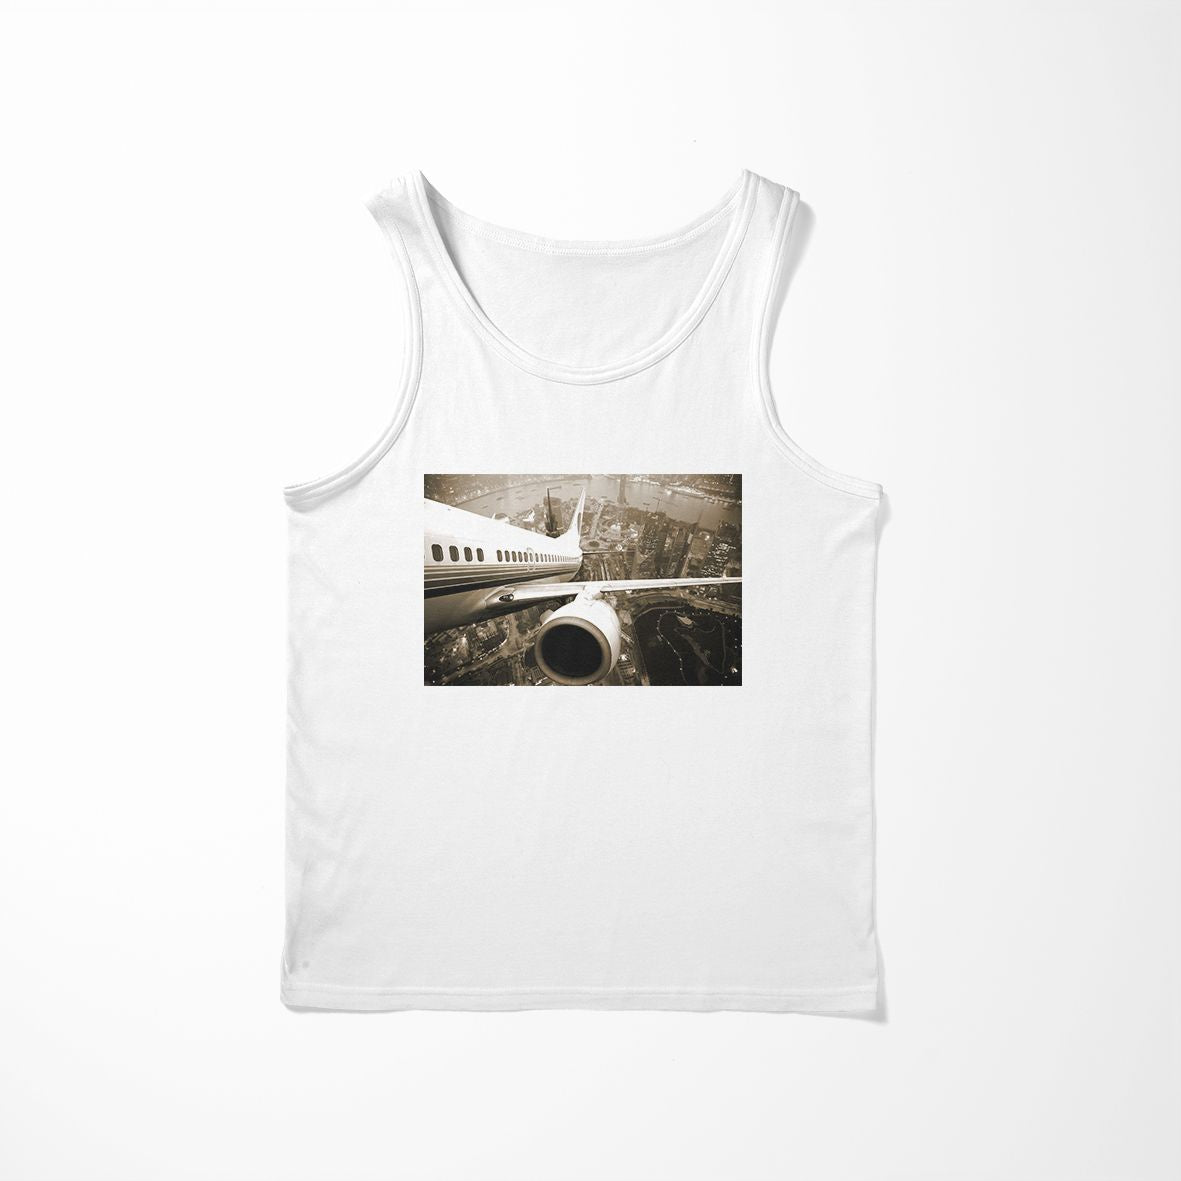 Departing Aircraft & City Scene behind Designed Tank Tops